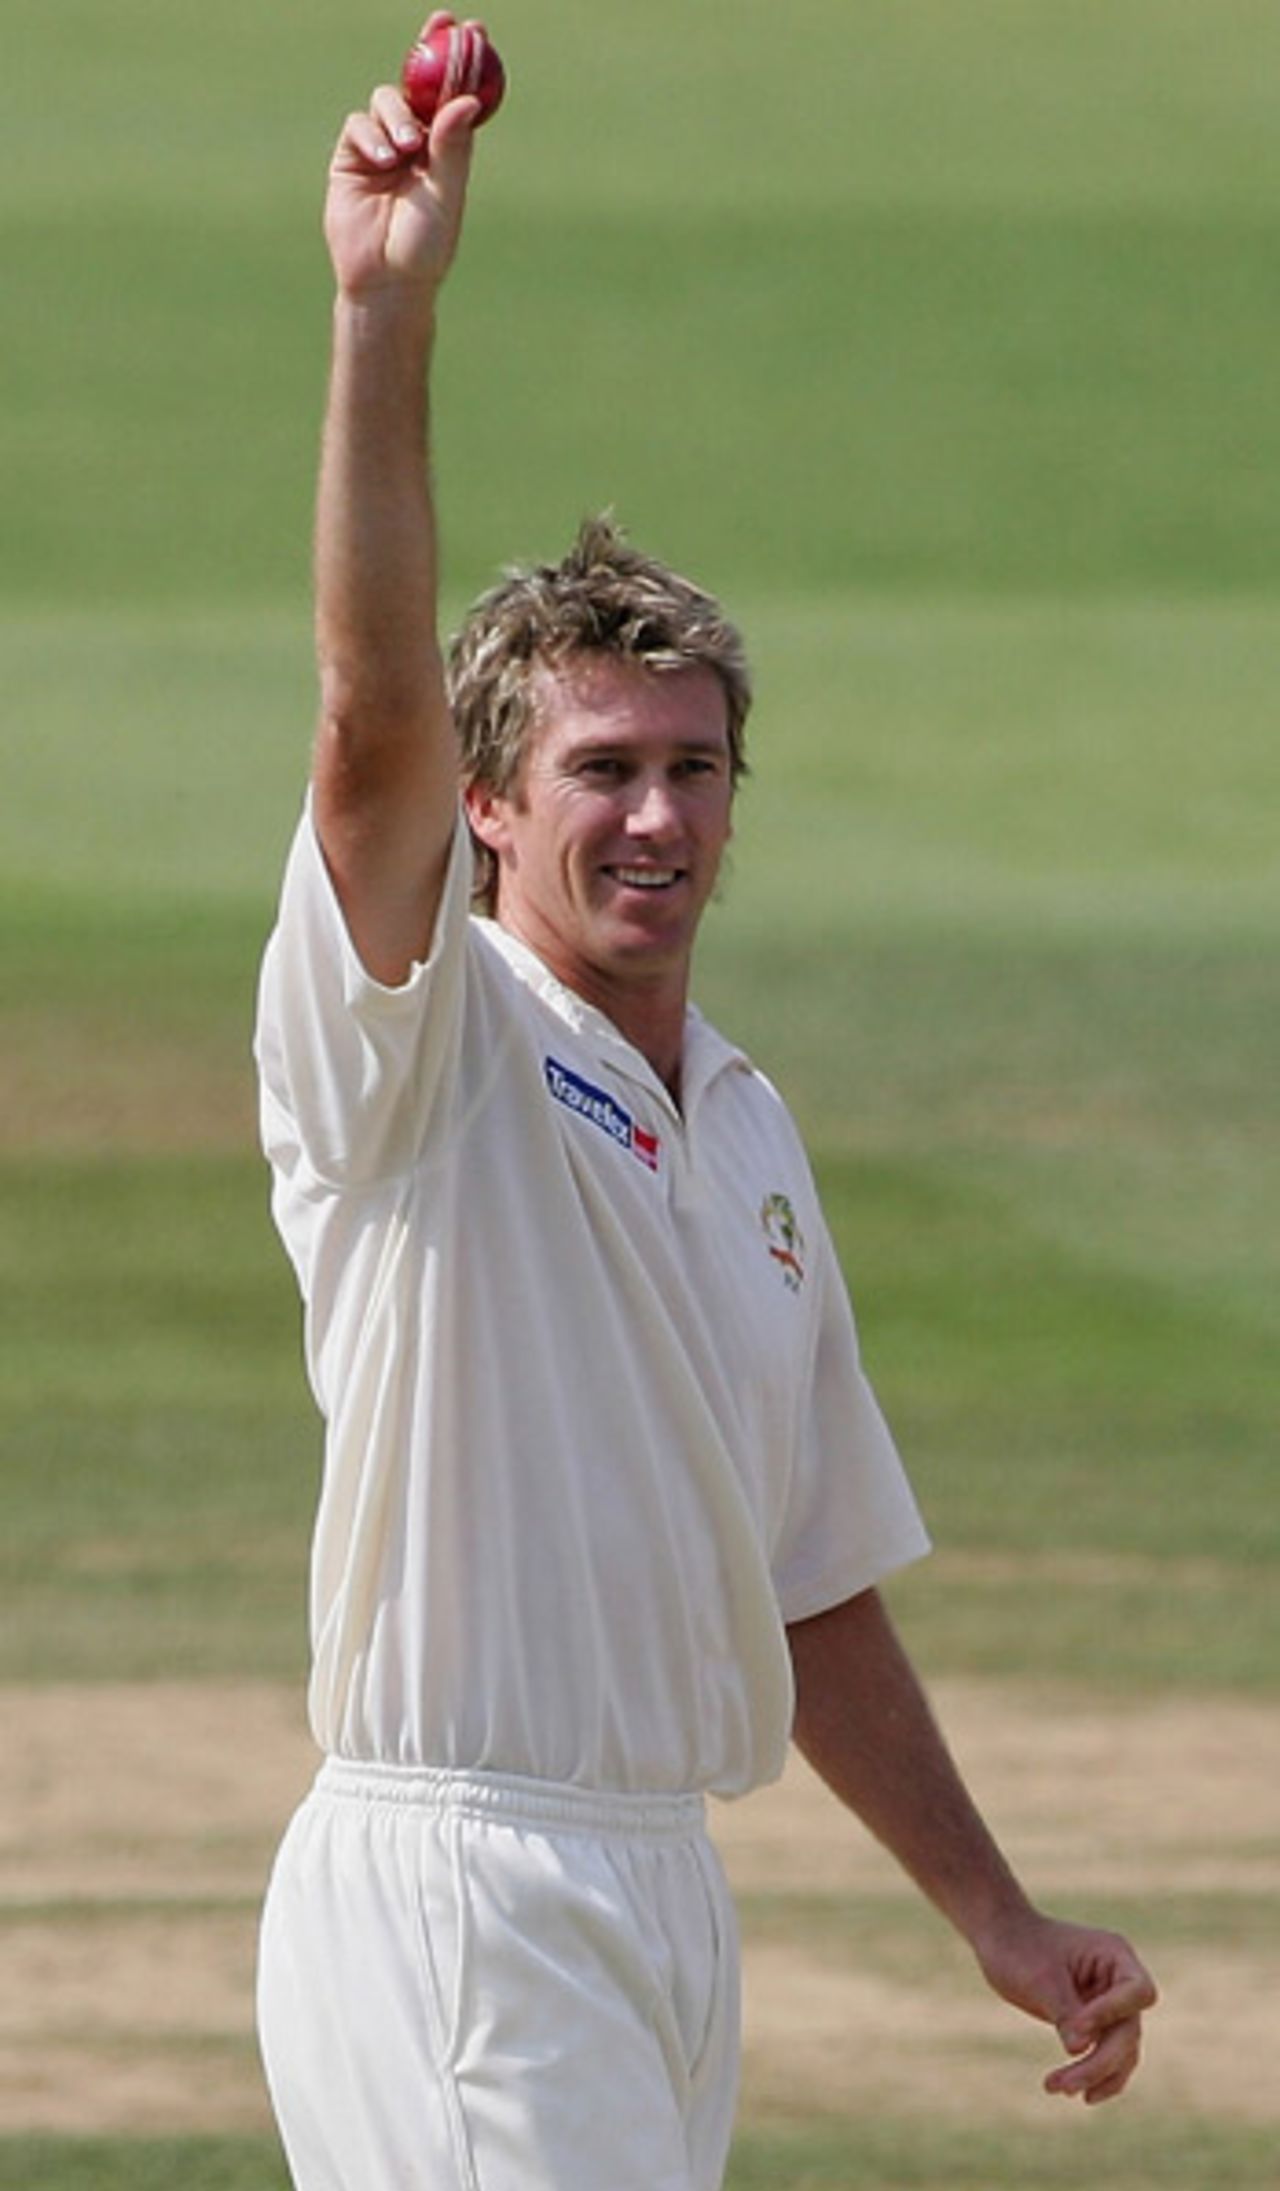 Glenn McGrath takes the wicket of Marcus Trescothick, and his 500th in Tests, England v Australia, Lord's, 21 July, 2005